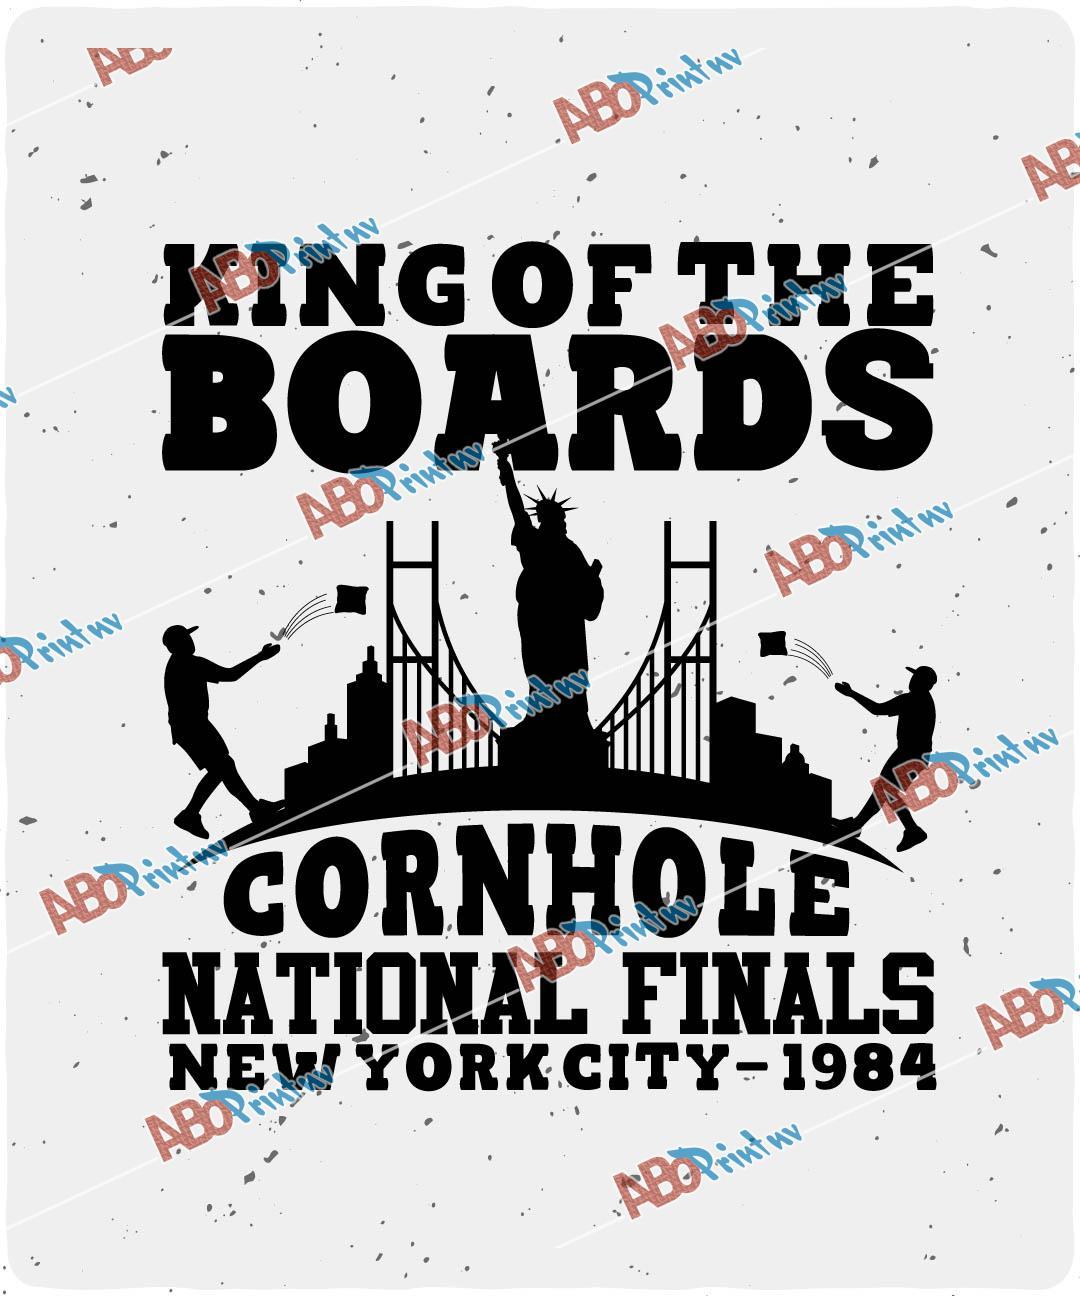 King Of The Boards Cornhole National Finals New York City.jpg